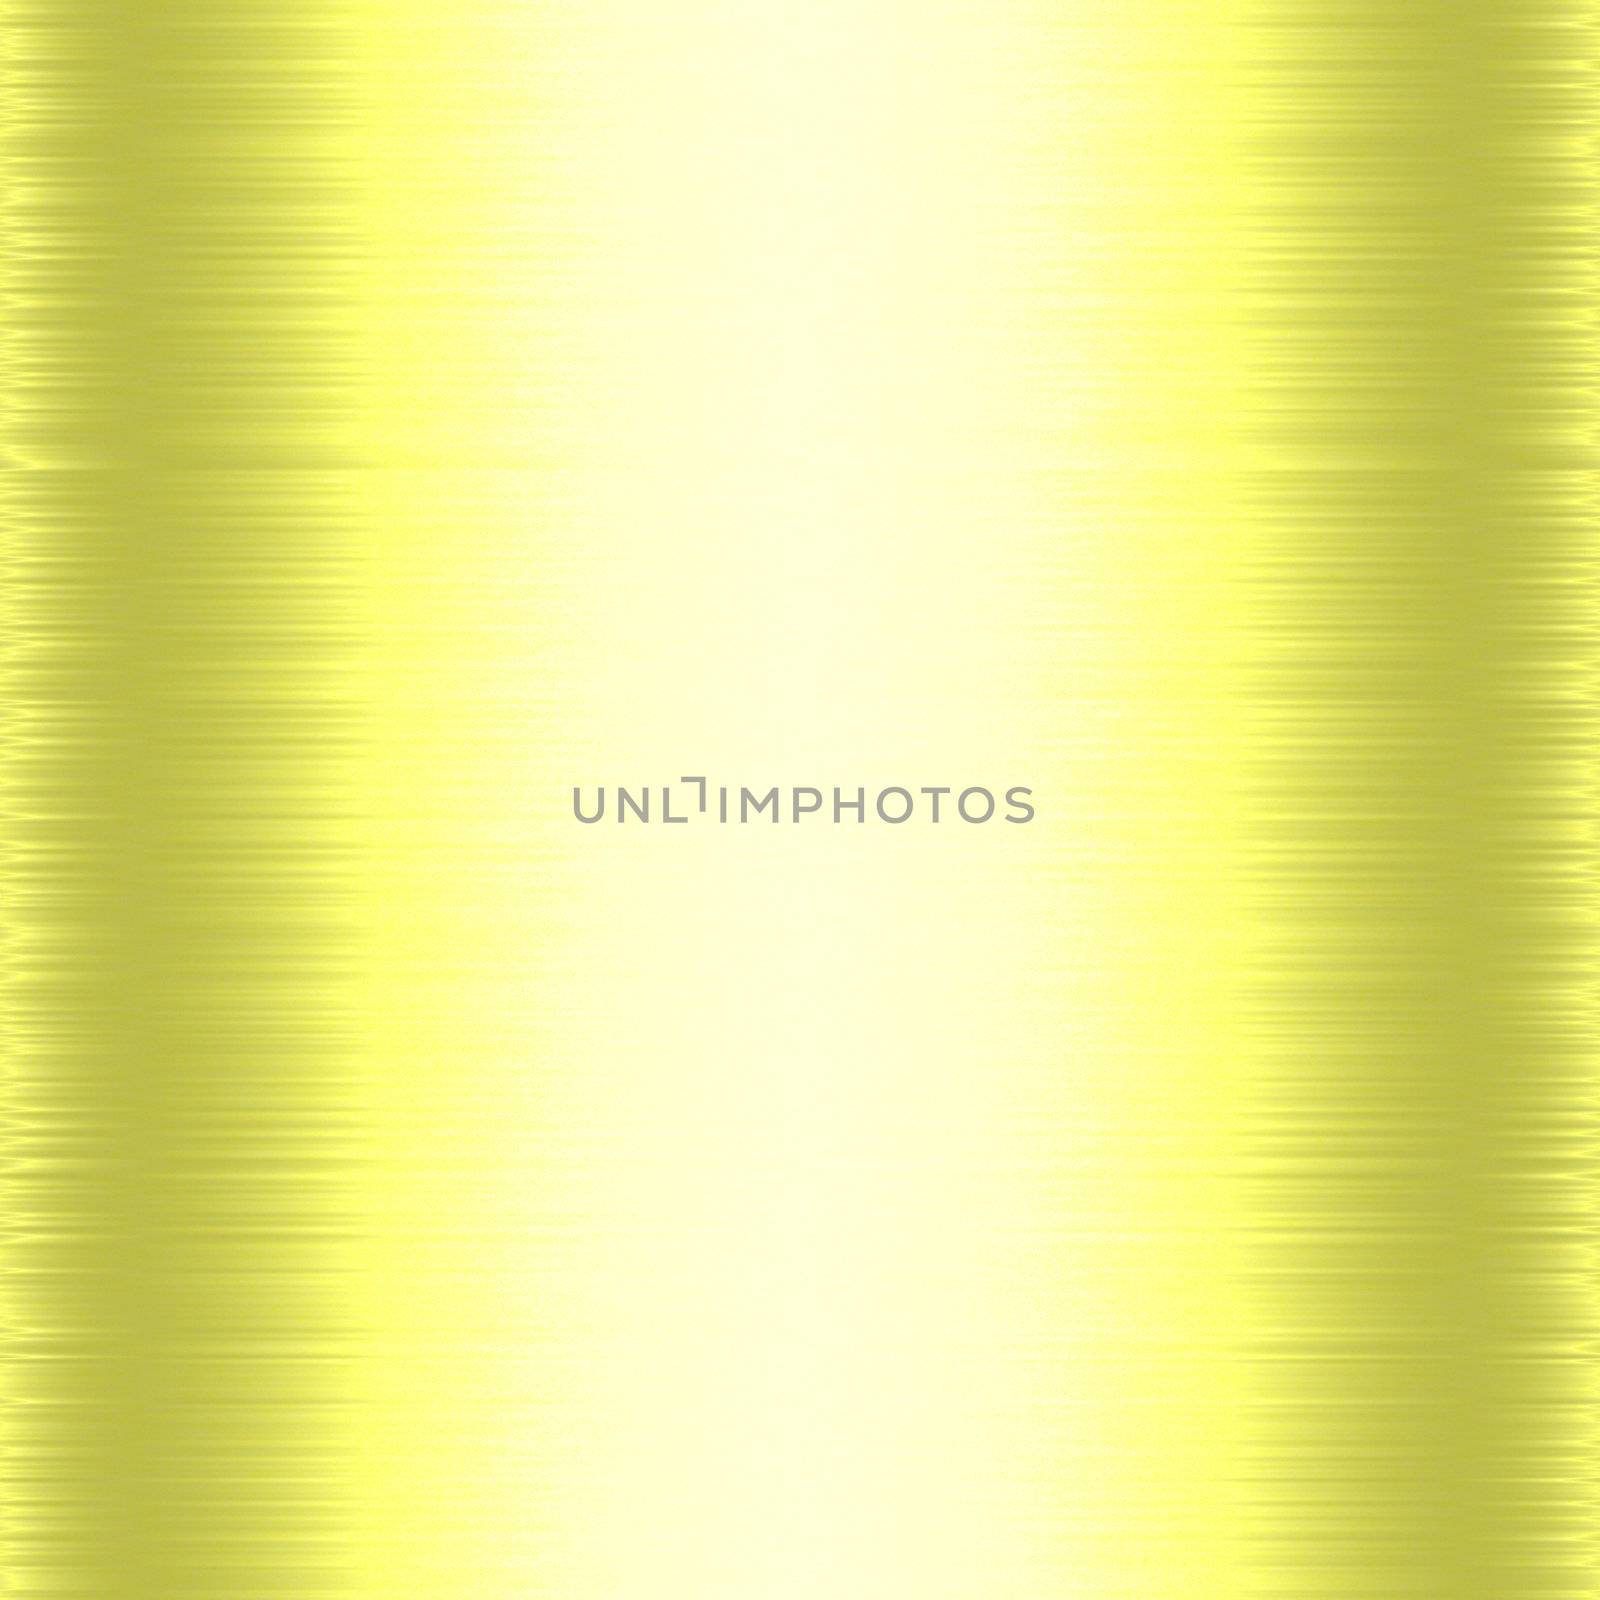 Yellow glowing background with smooth gradient texture to black border on sides of frame with bright centre